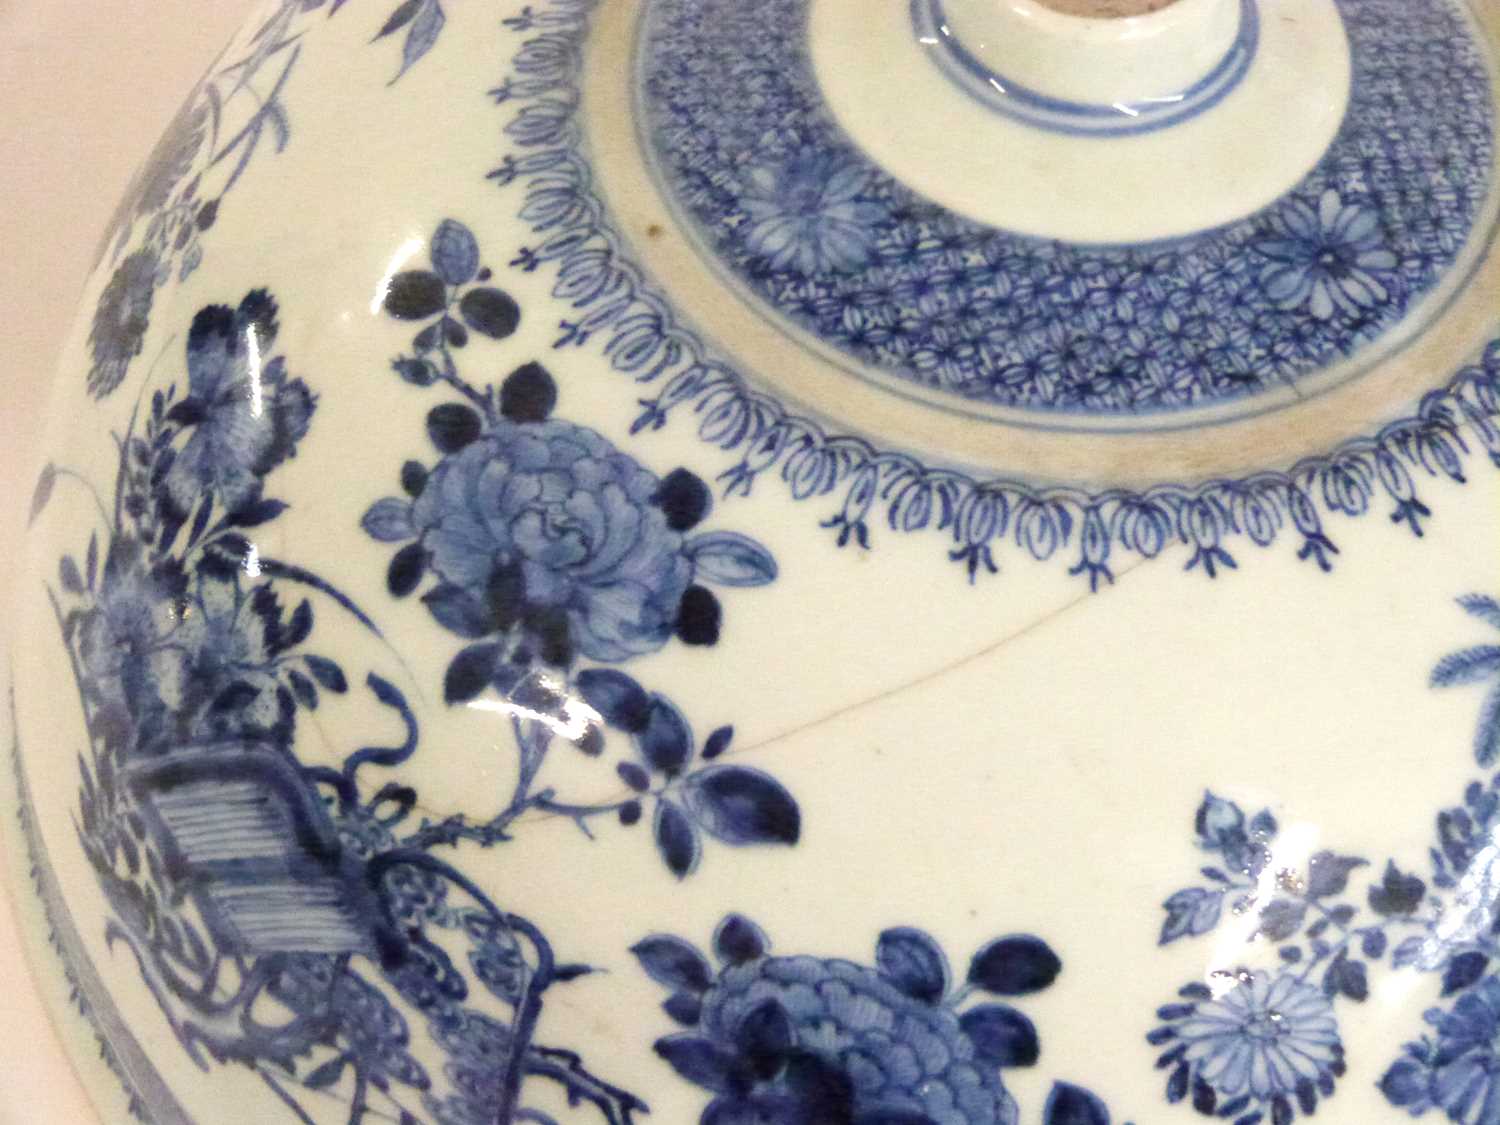 An interesting 18th Century Chinese porcelain export bowl or cover decorated with a floral design - Image 5 of 8